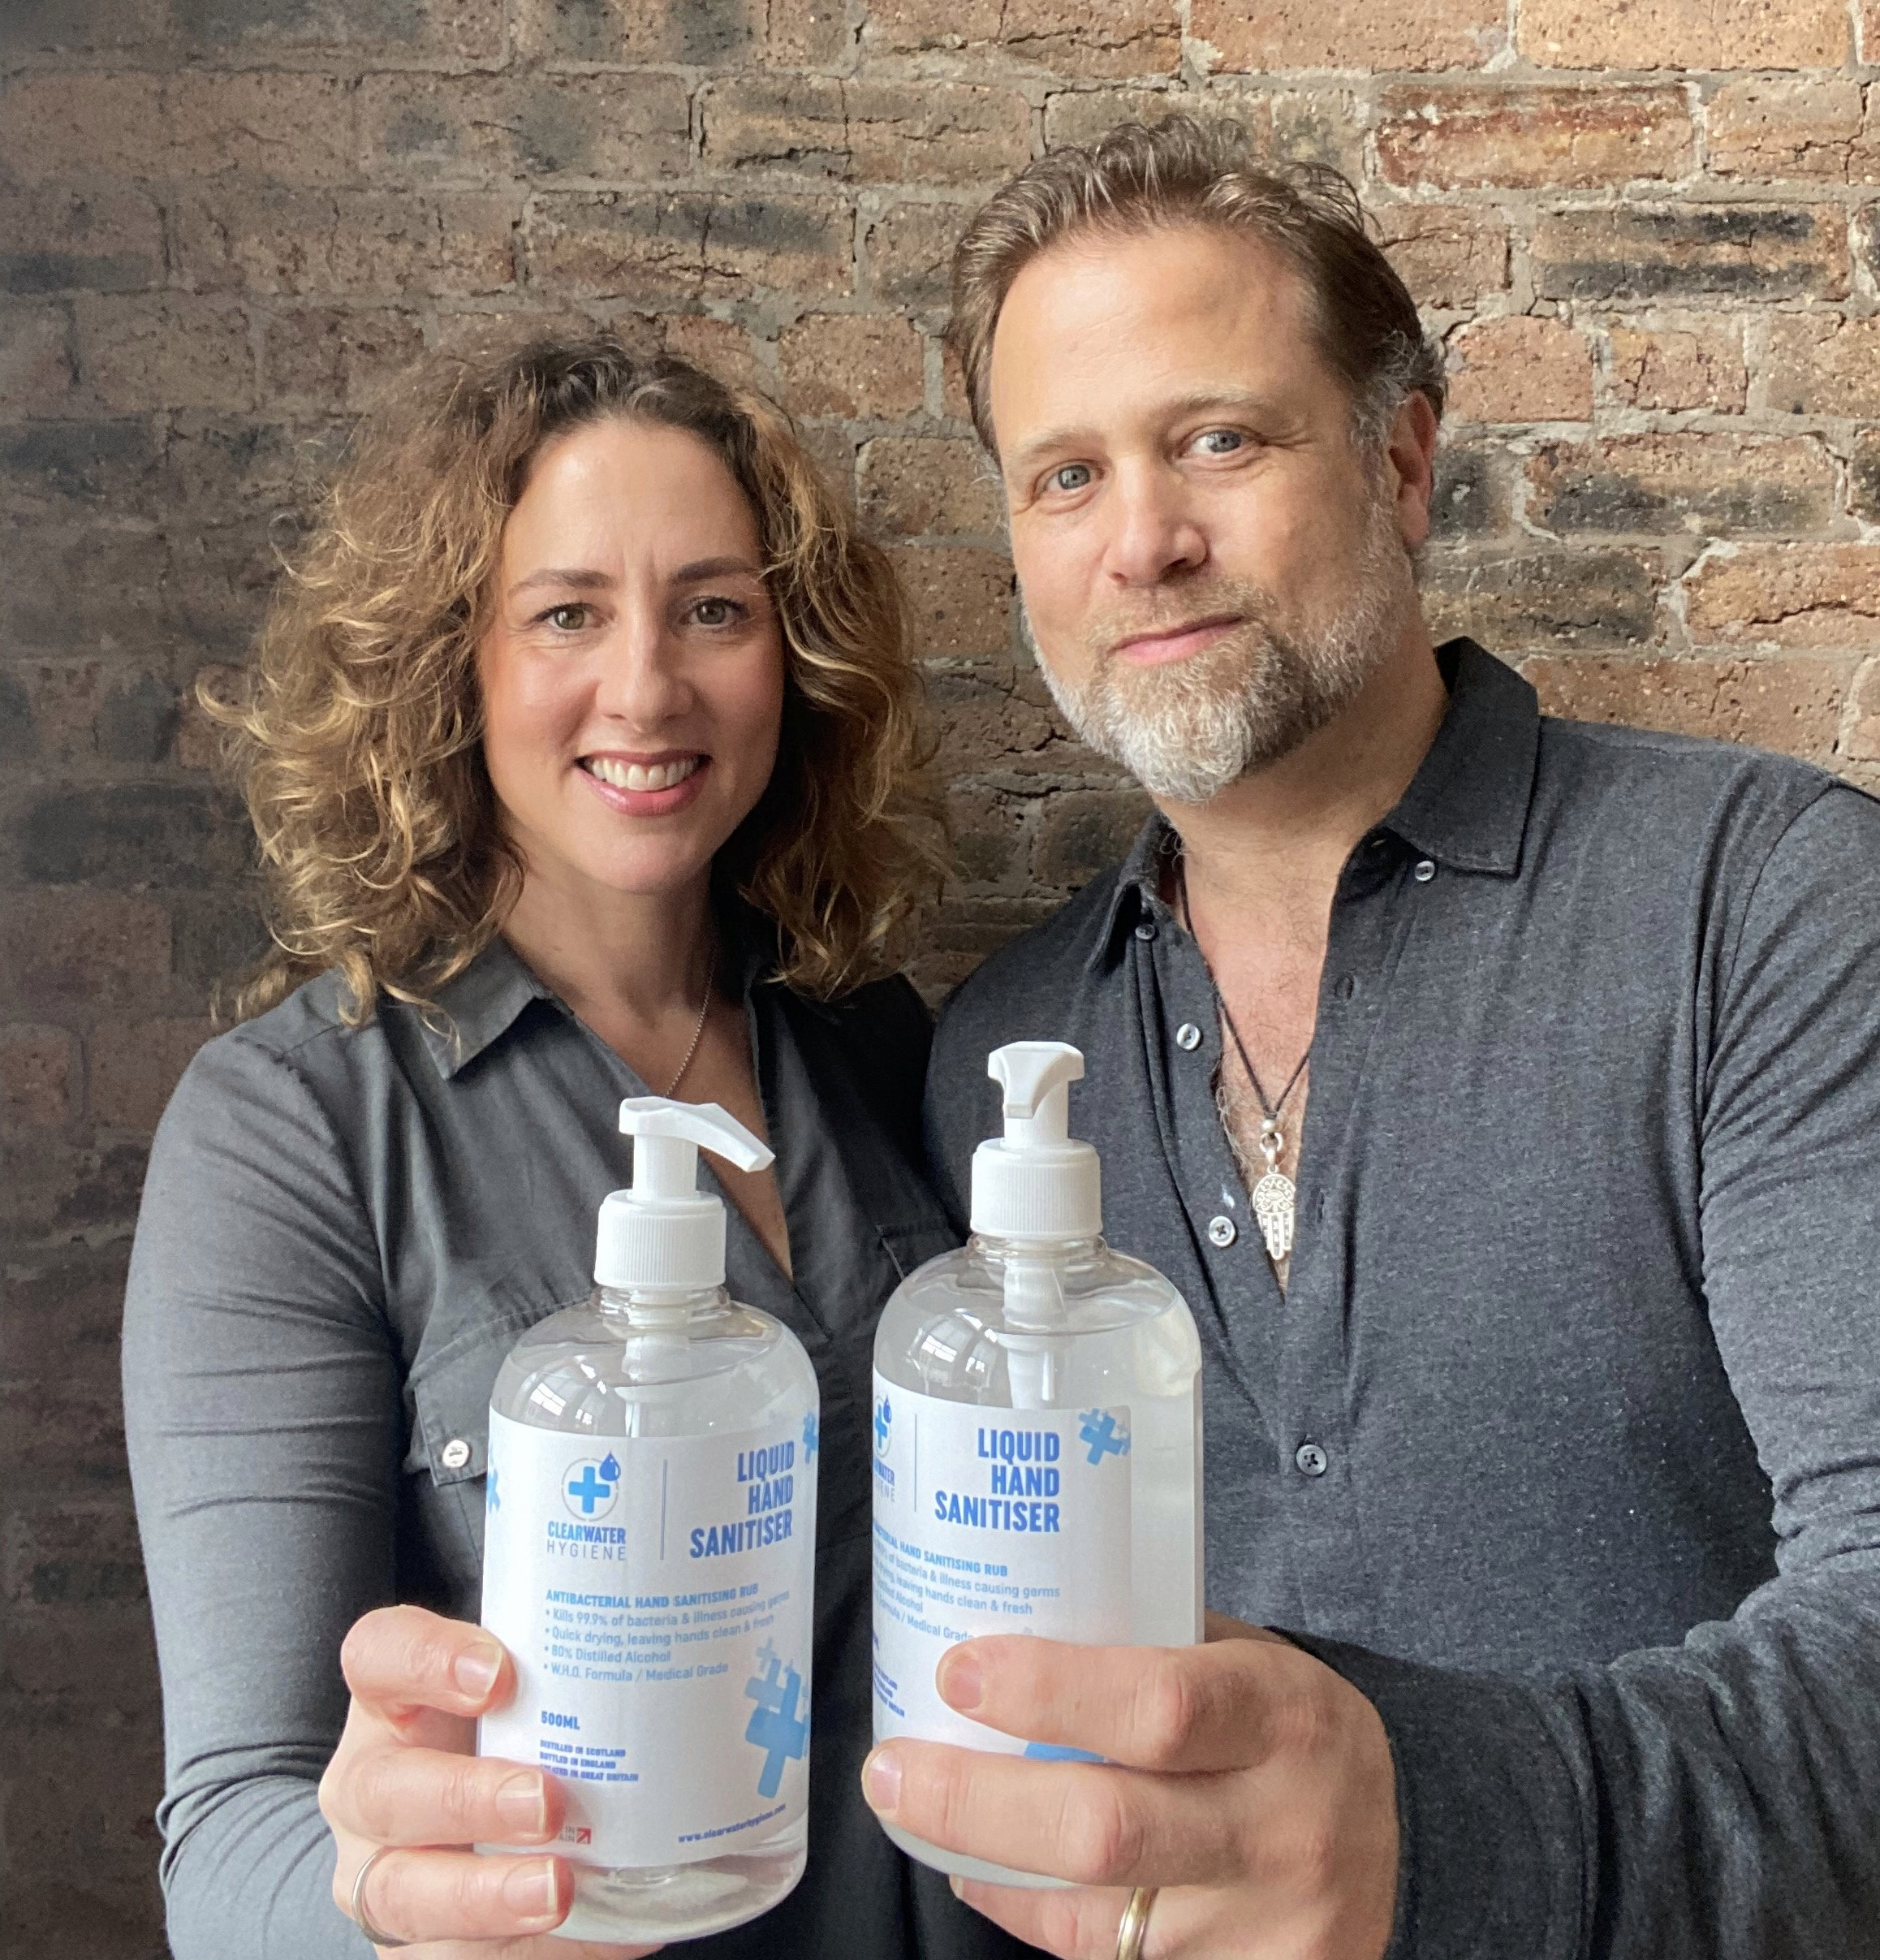 Andrew and Rachel Montague, founders of ClearWater Hygiene